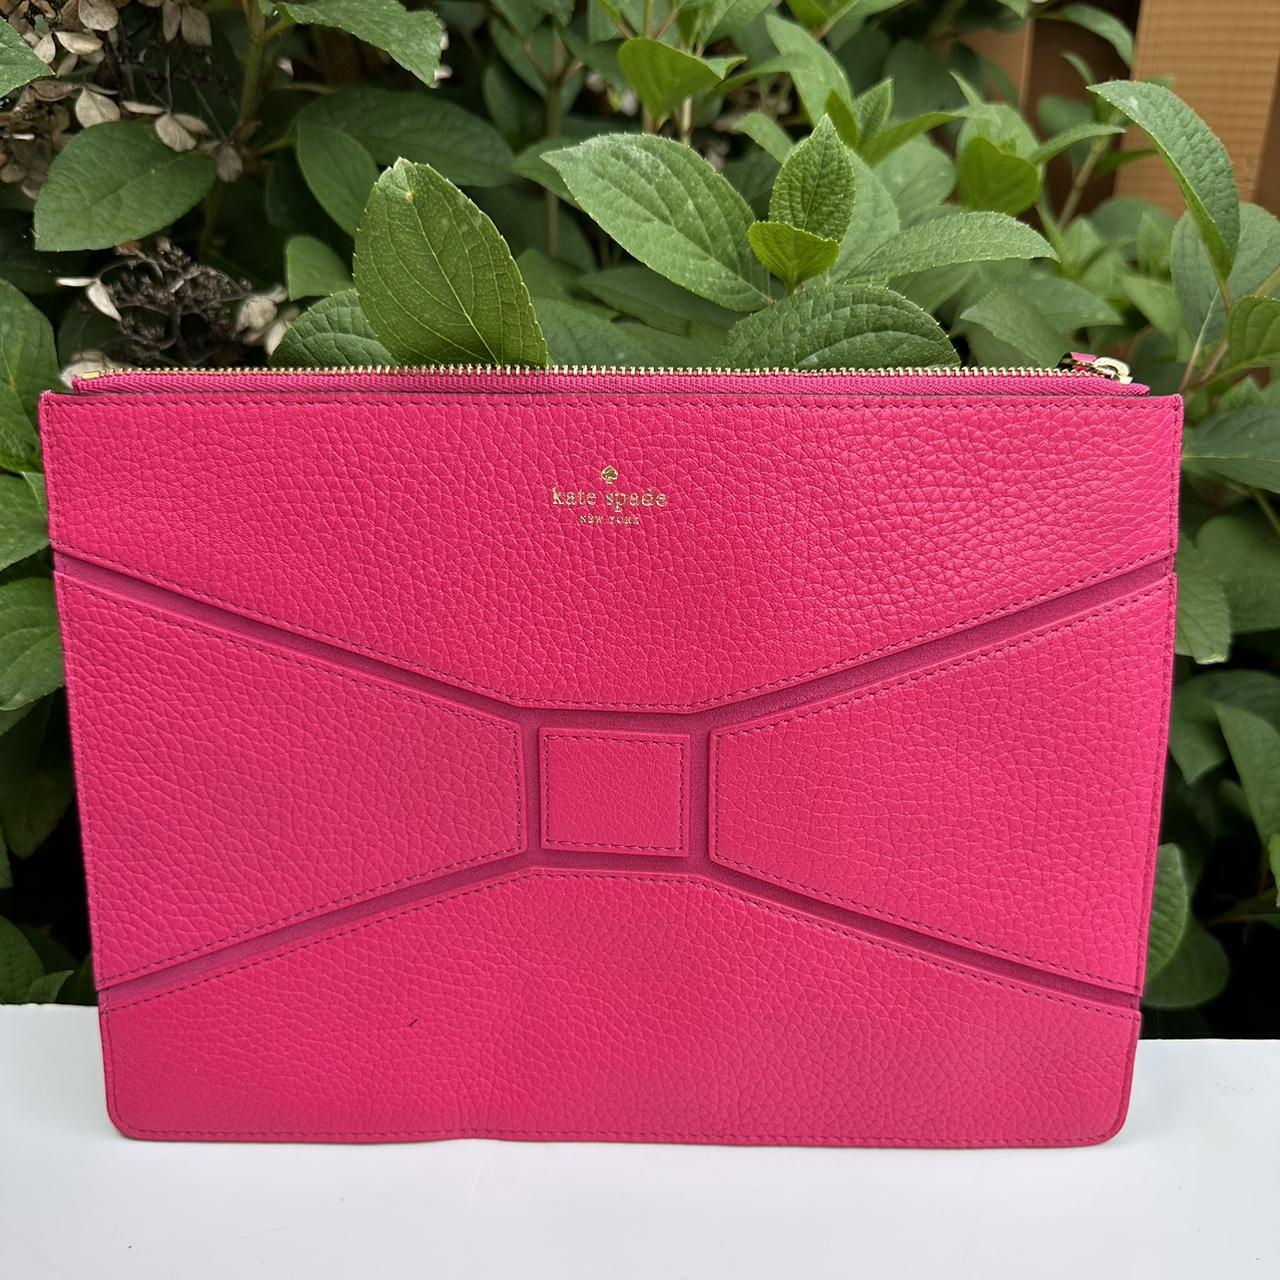 back to school in kate spade – a lonestar state of southern